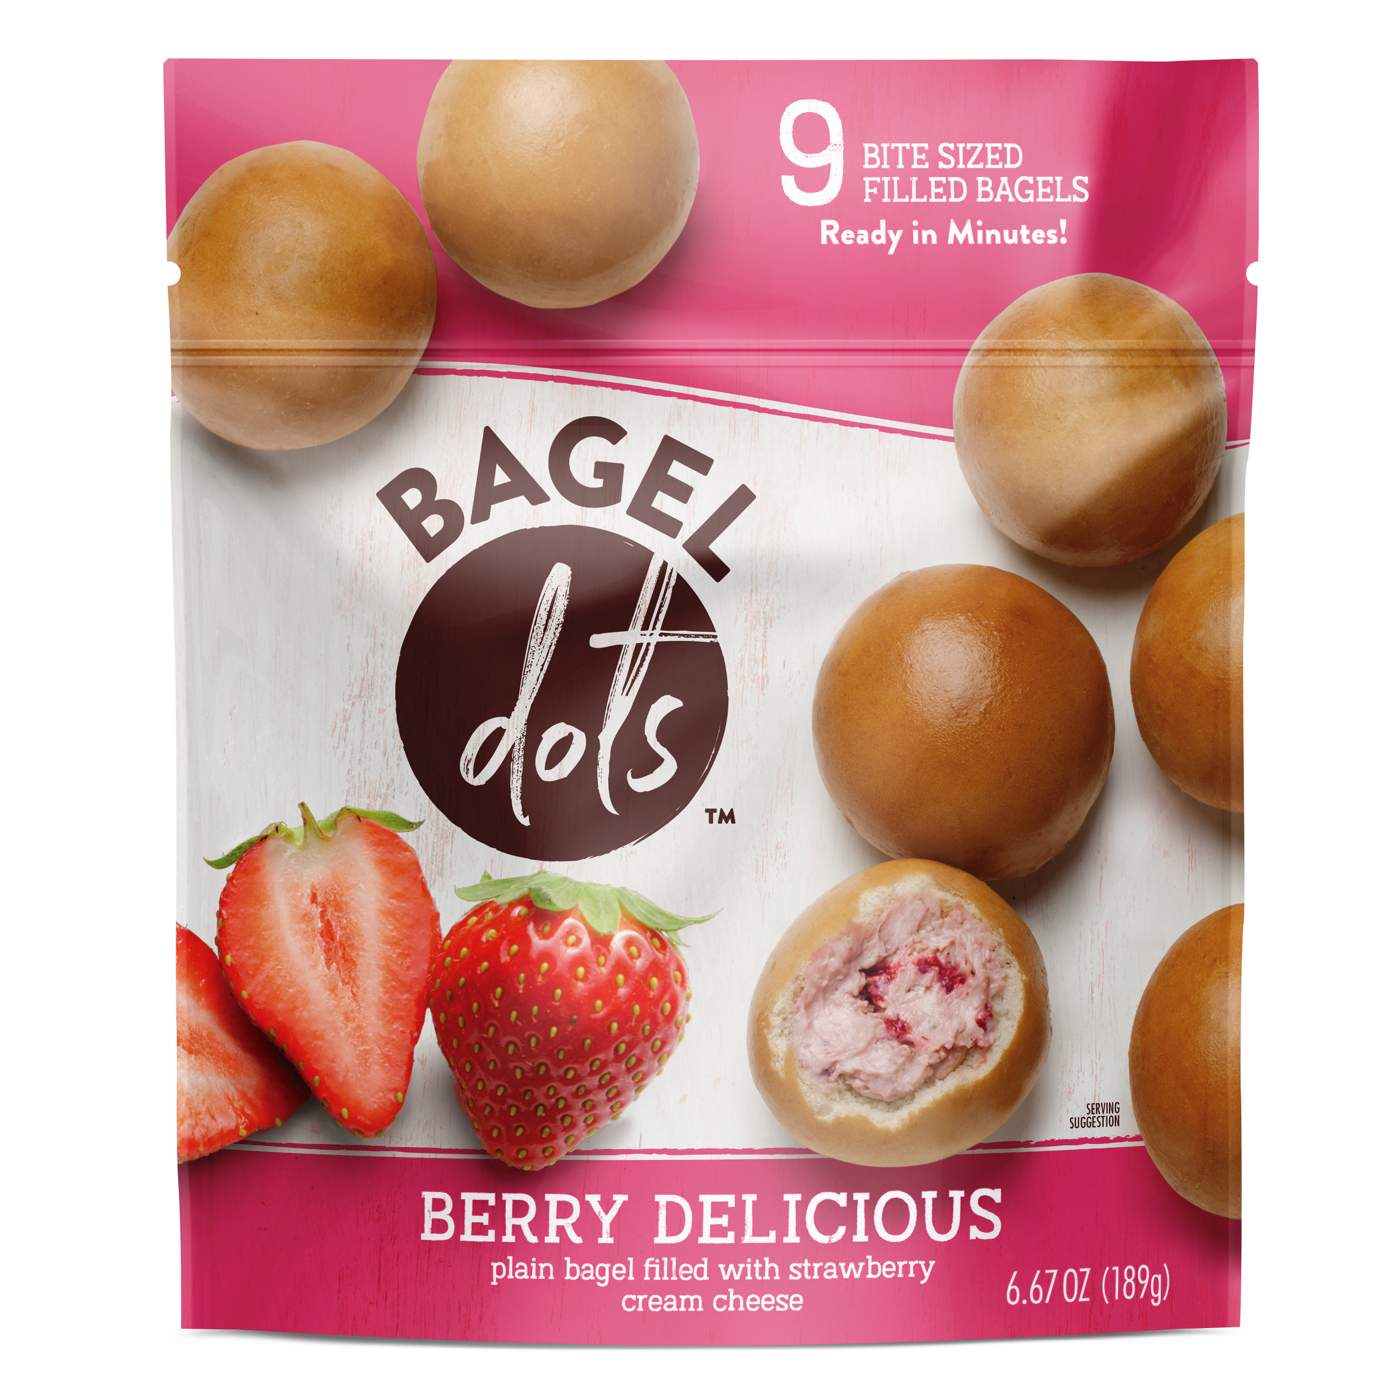 Bagel Dots Berry Delicious; image 1 of 3